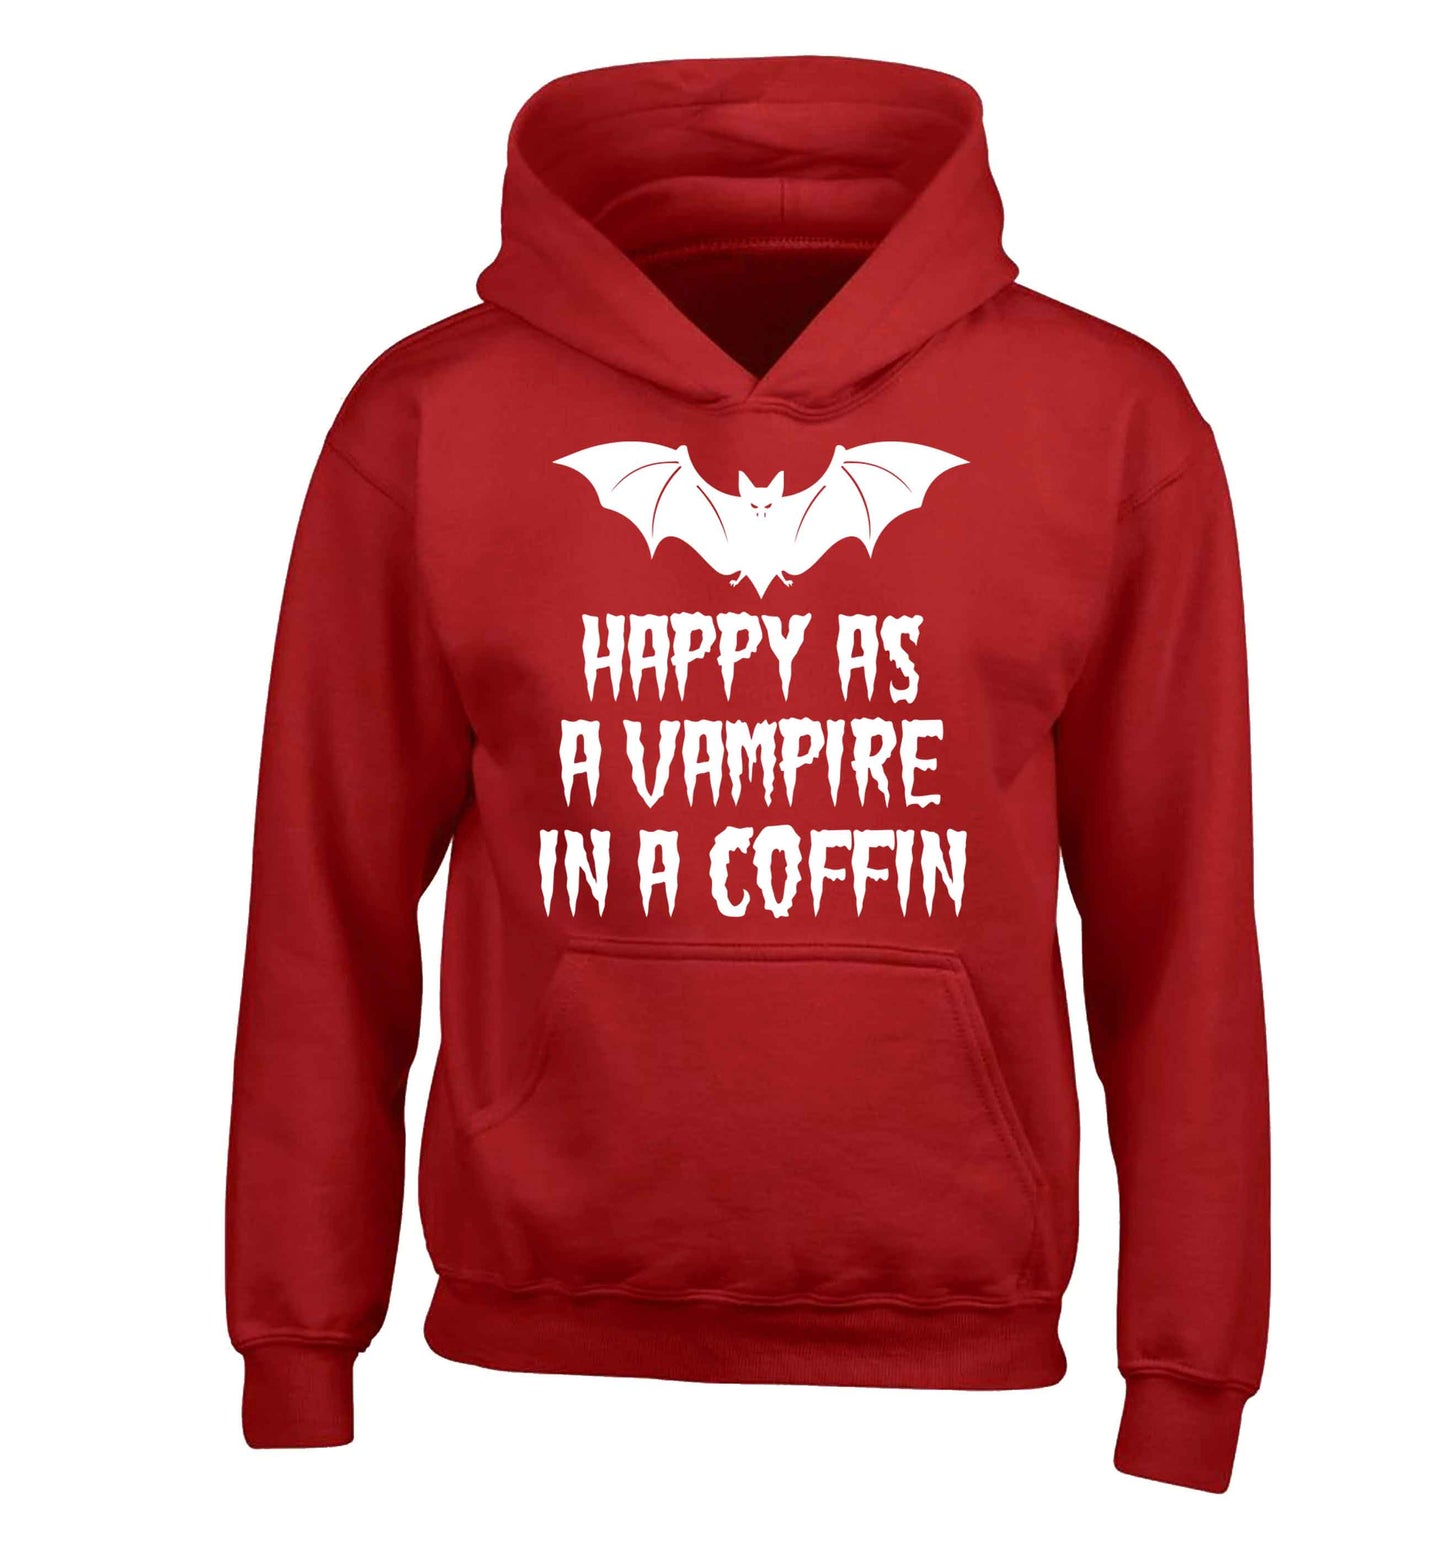 Happy as a vampire in a coffin children's red hoodie 12-13 Years